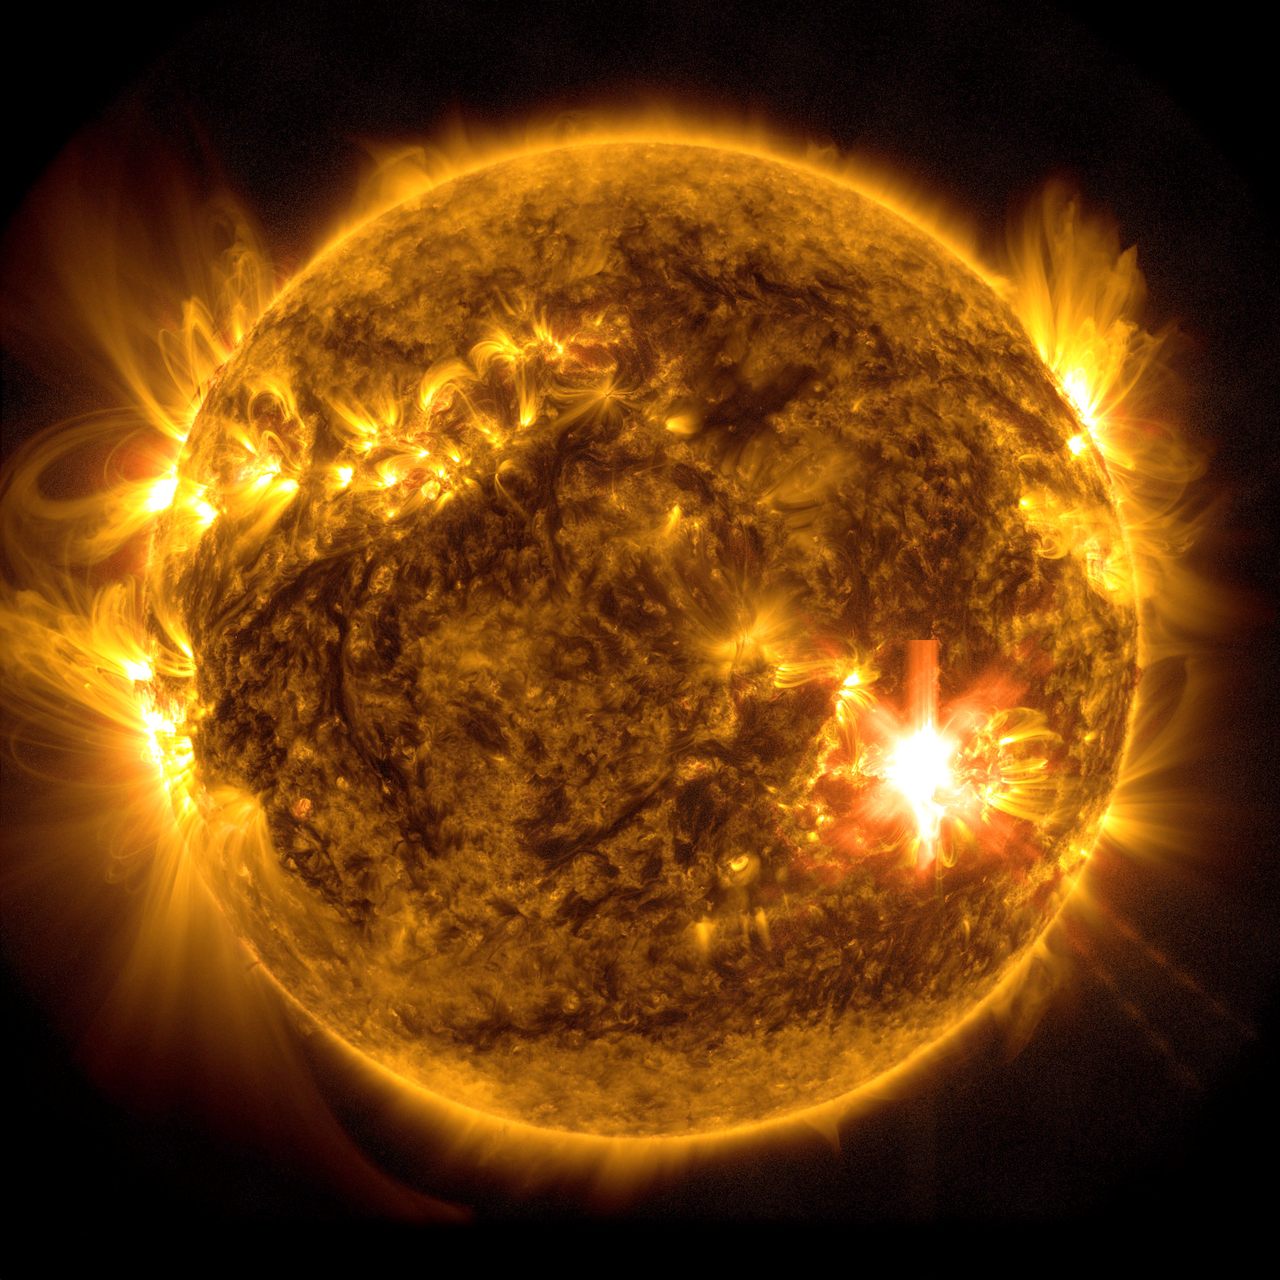 A powerful X3.9 solar flare, visible at lower right, erupts on May 10 in an image captured by NASA’s Solar Dynamics Observatory.